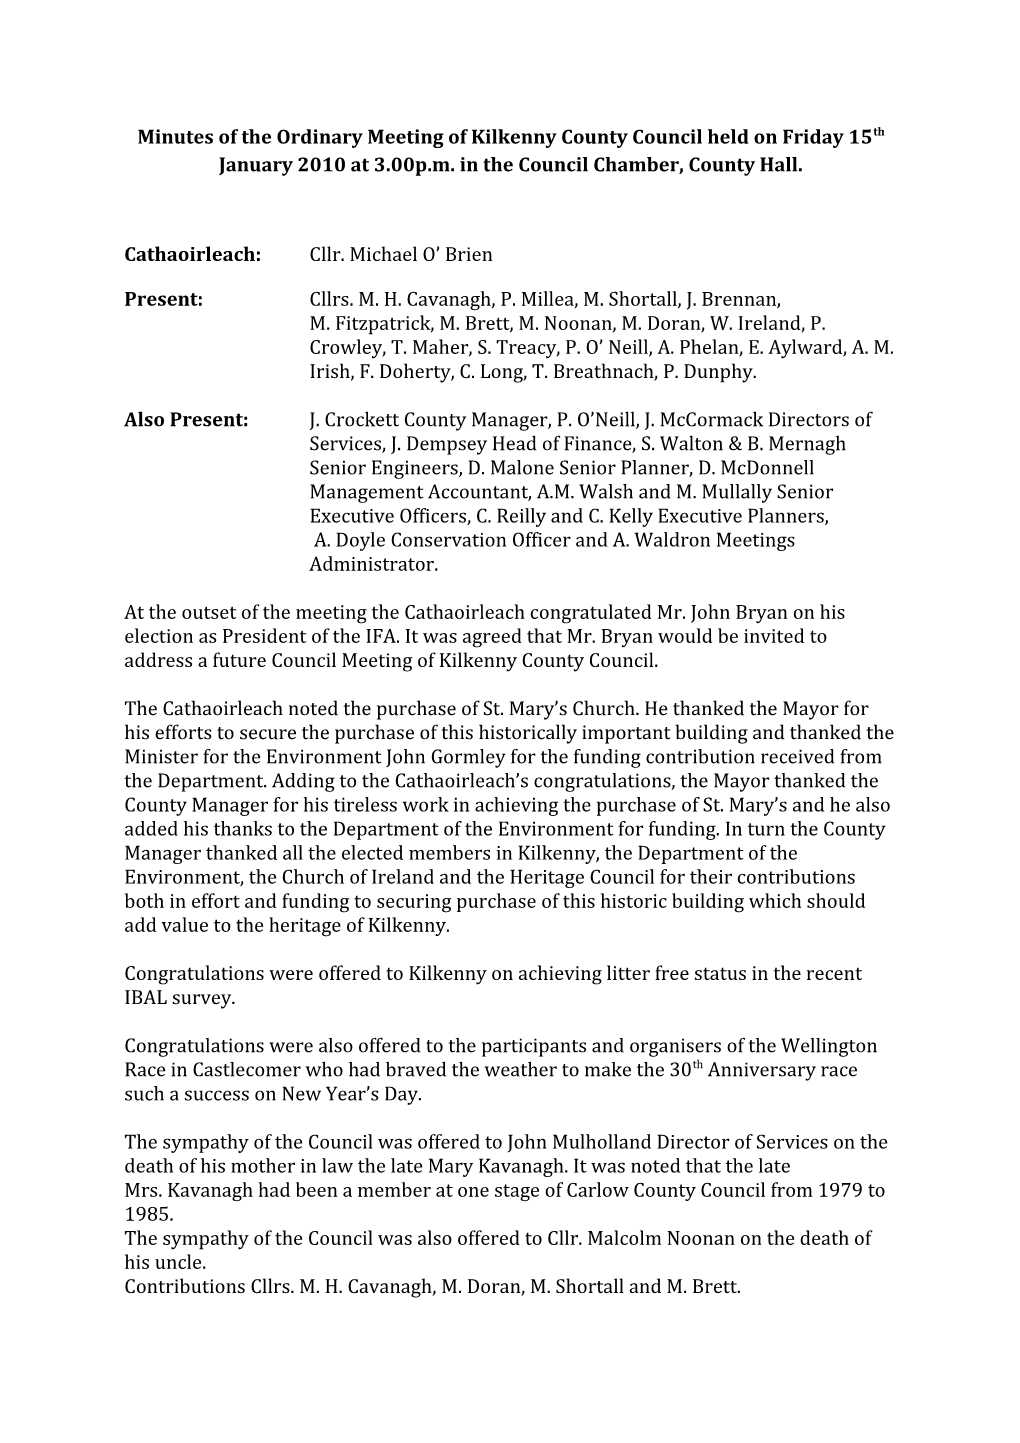 Minutes of the Ordinary Meeting of Kilkenny County Council Held on Friday 15Th January 2010 at 3